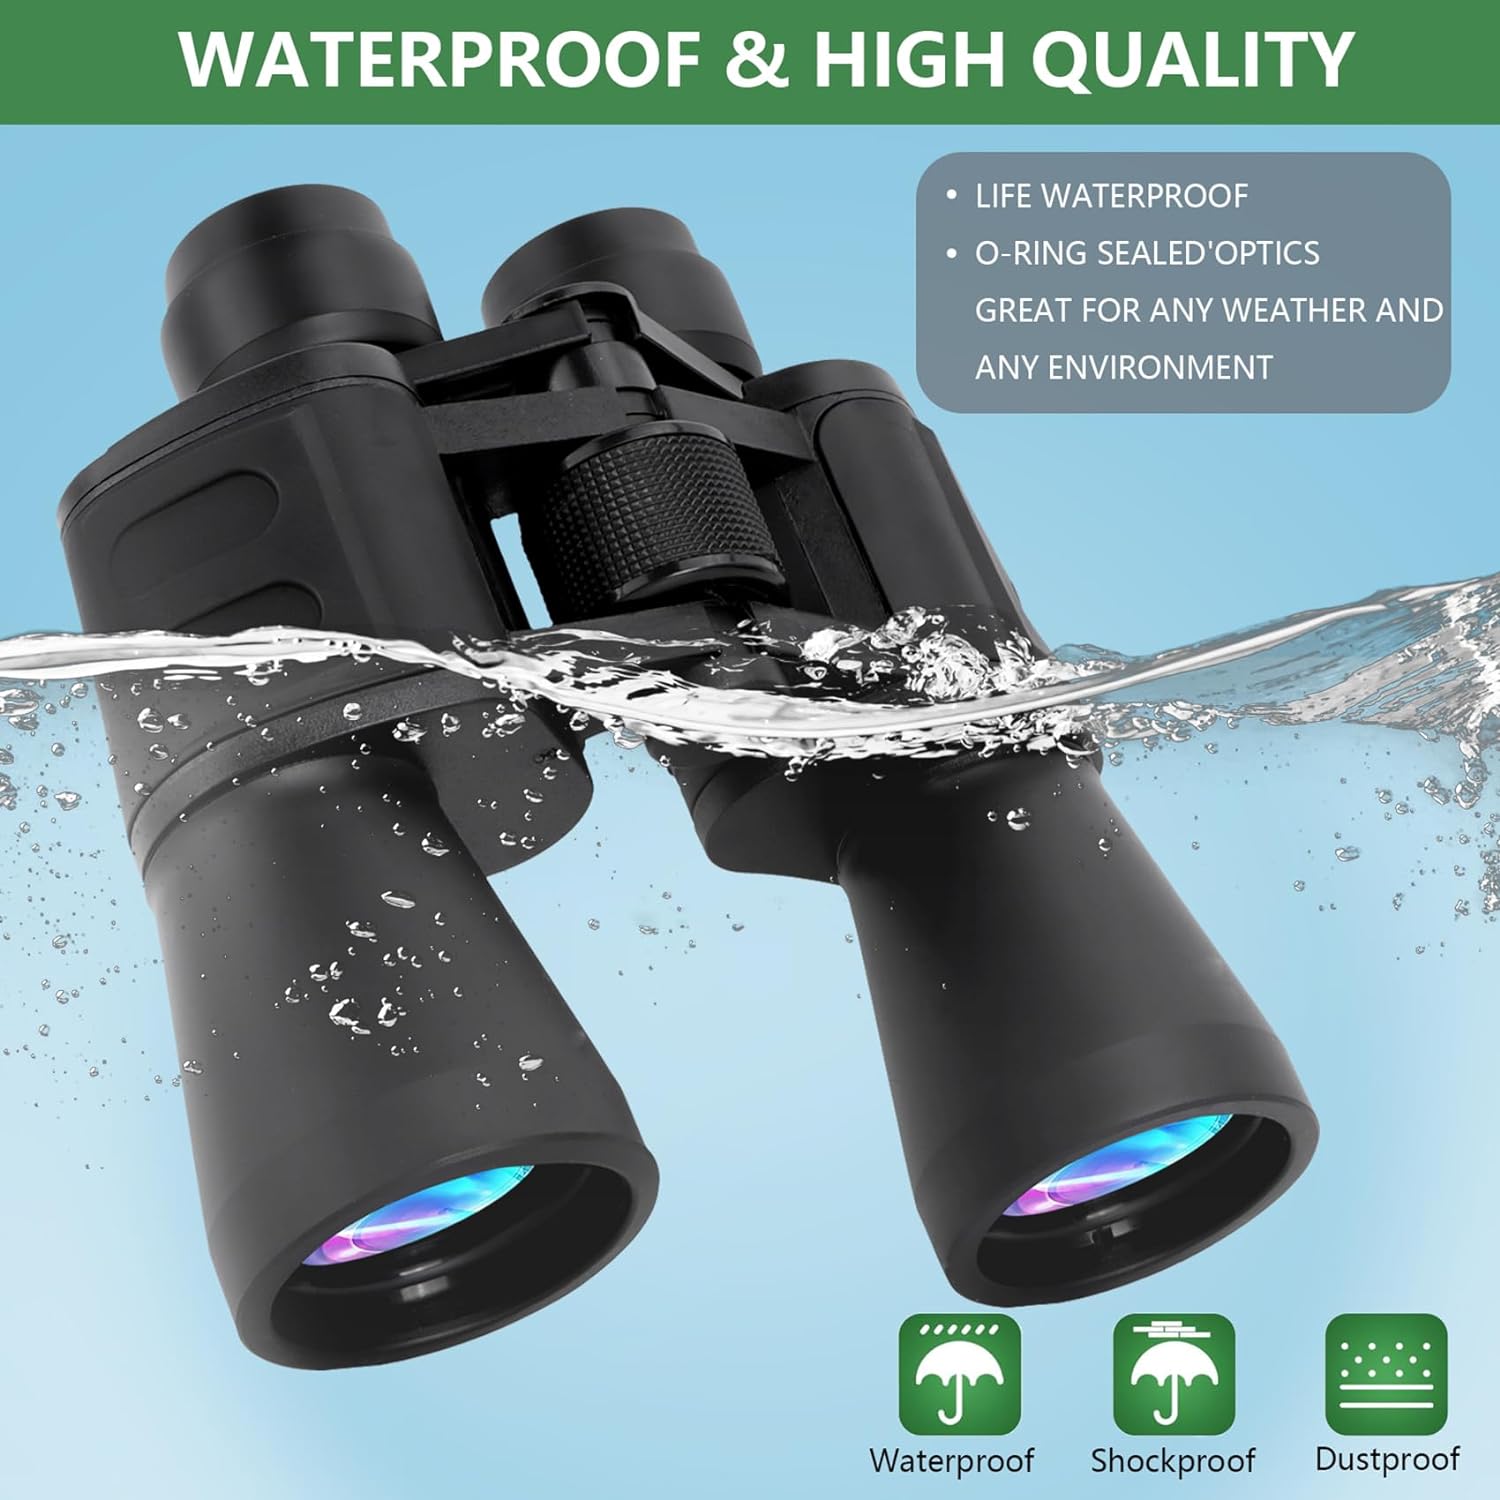 Binoculars 20x50 - Professional High Magnification HD Compact Binoculars for Bird Watching, Hunting, and Outdoor Activities - Low Light Night Vision, BAK-4 Prism - Portable, Durable, Easy (Black)